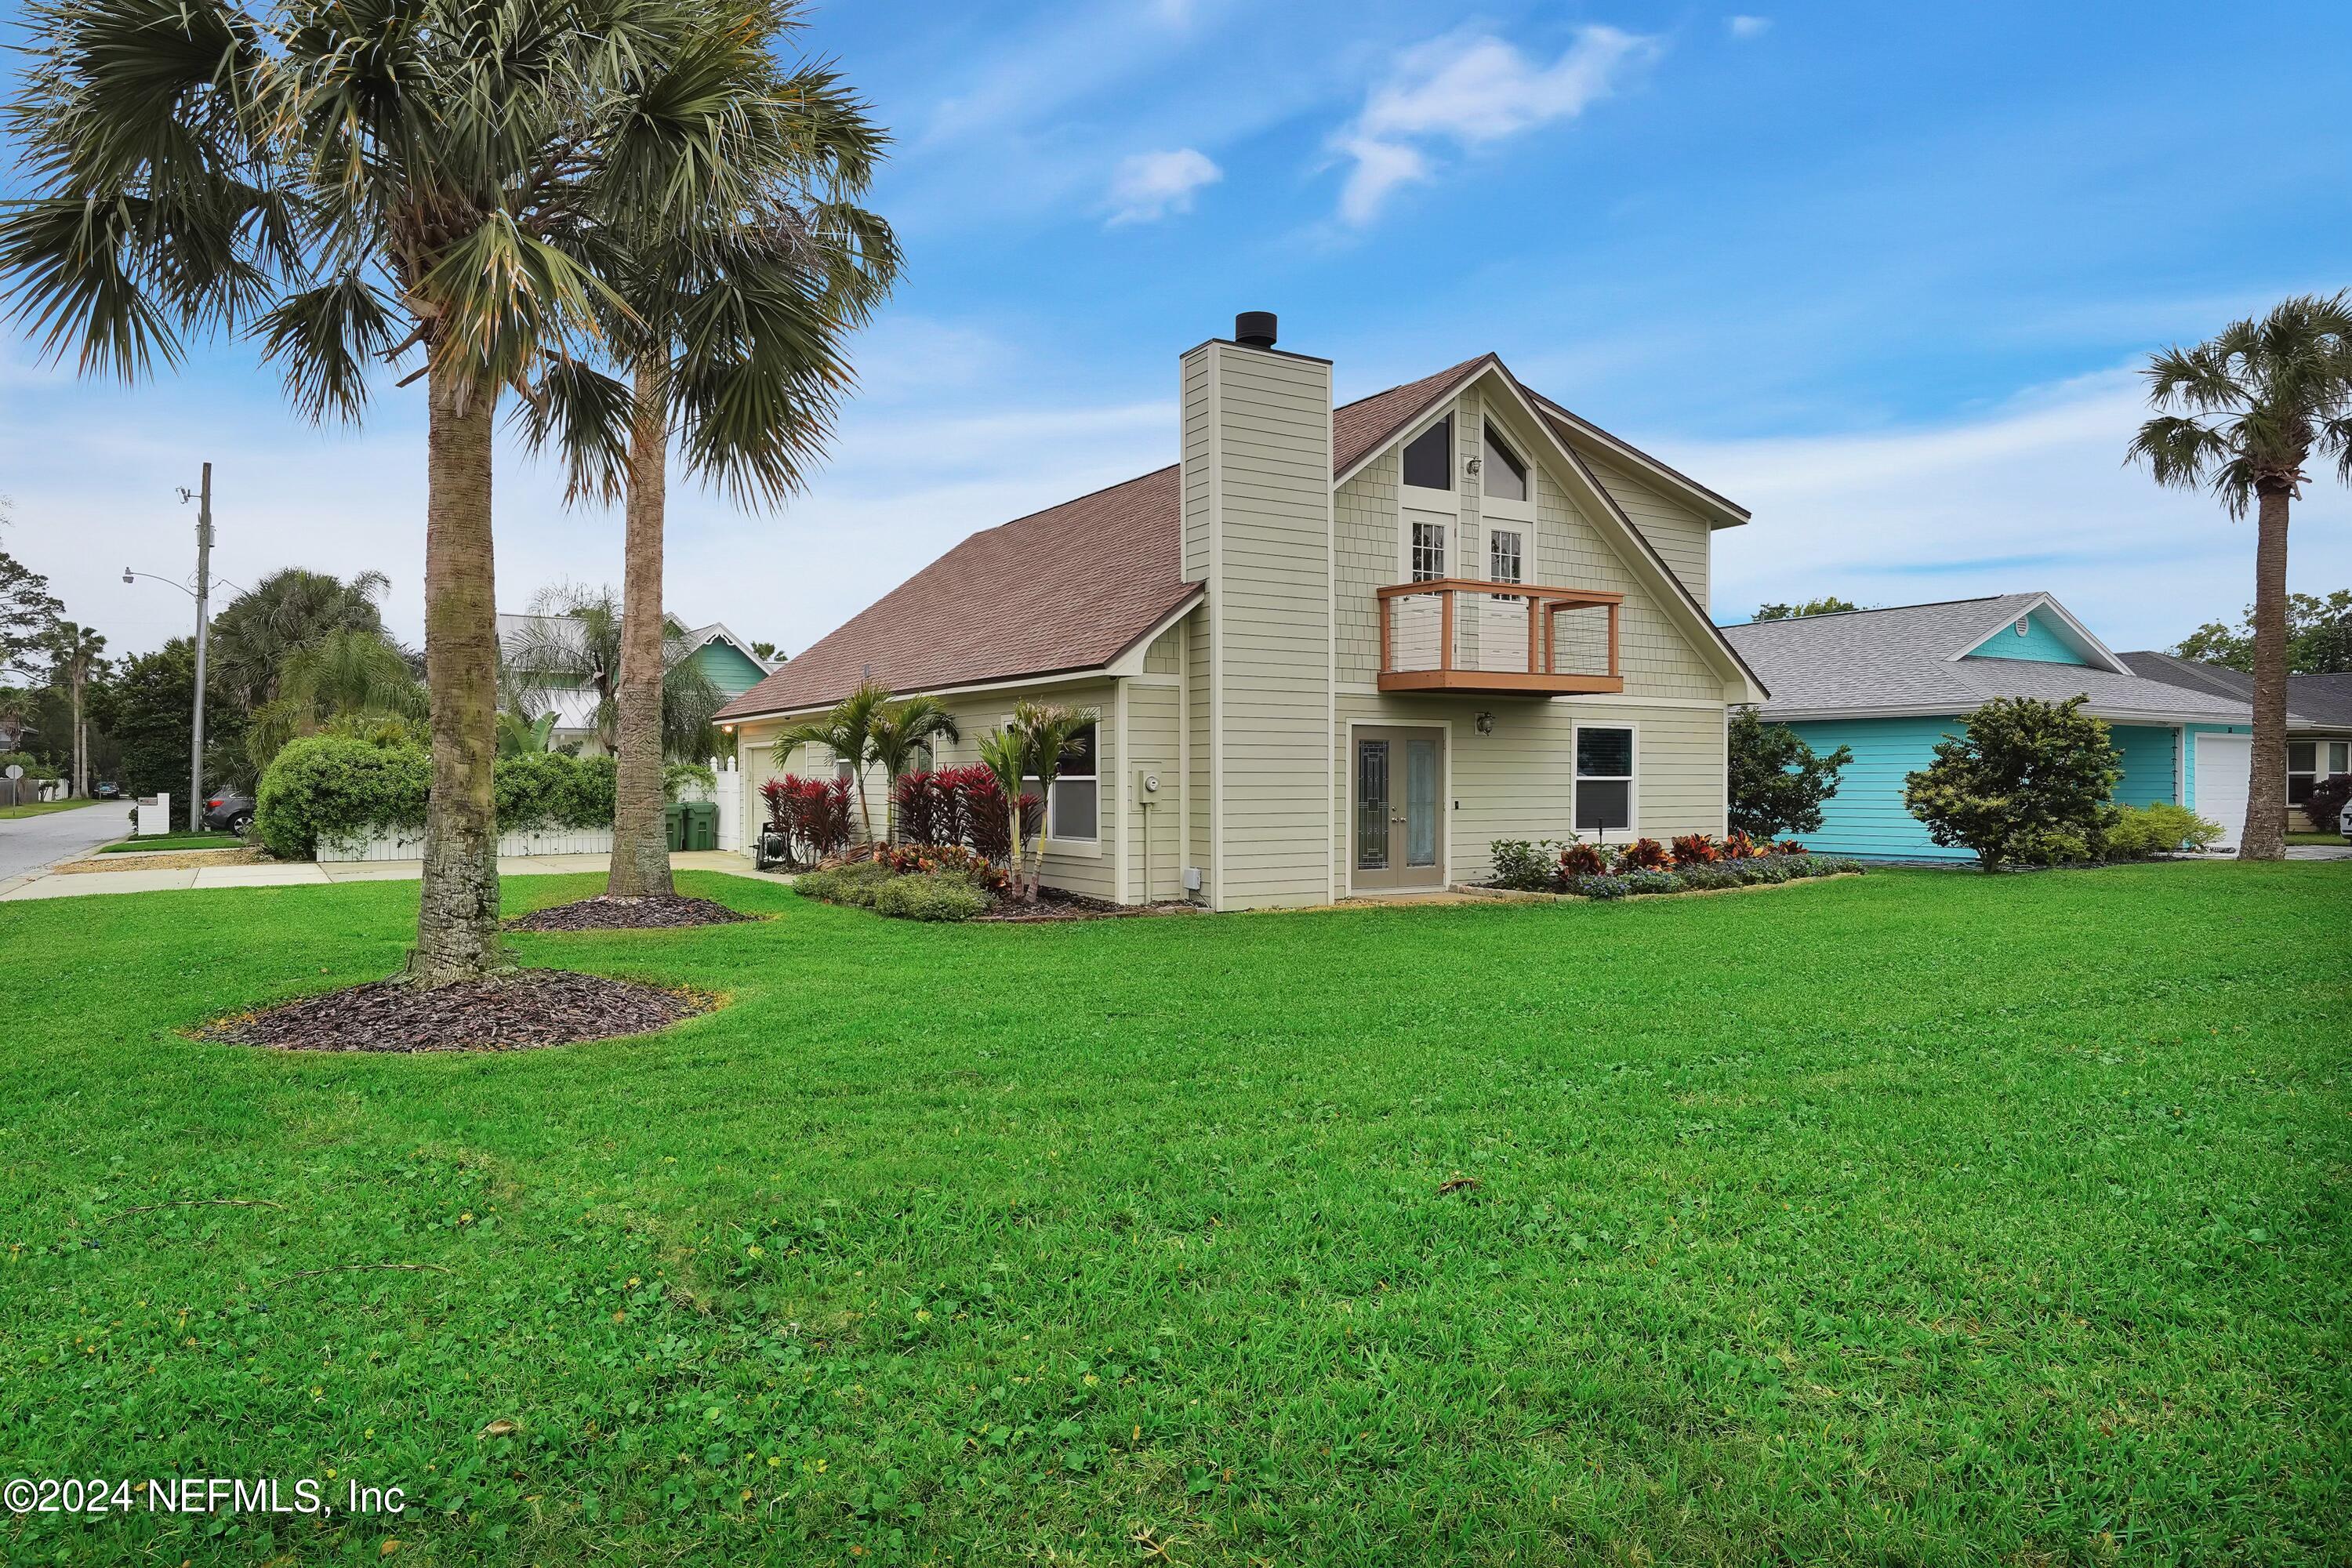 Jacksonville Beach, FL home for sale located at 1110 Ruth Avenue, Jacksonville Beach, FL 32250